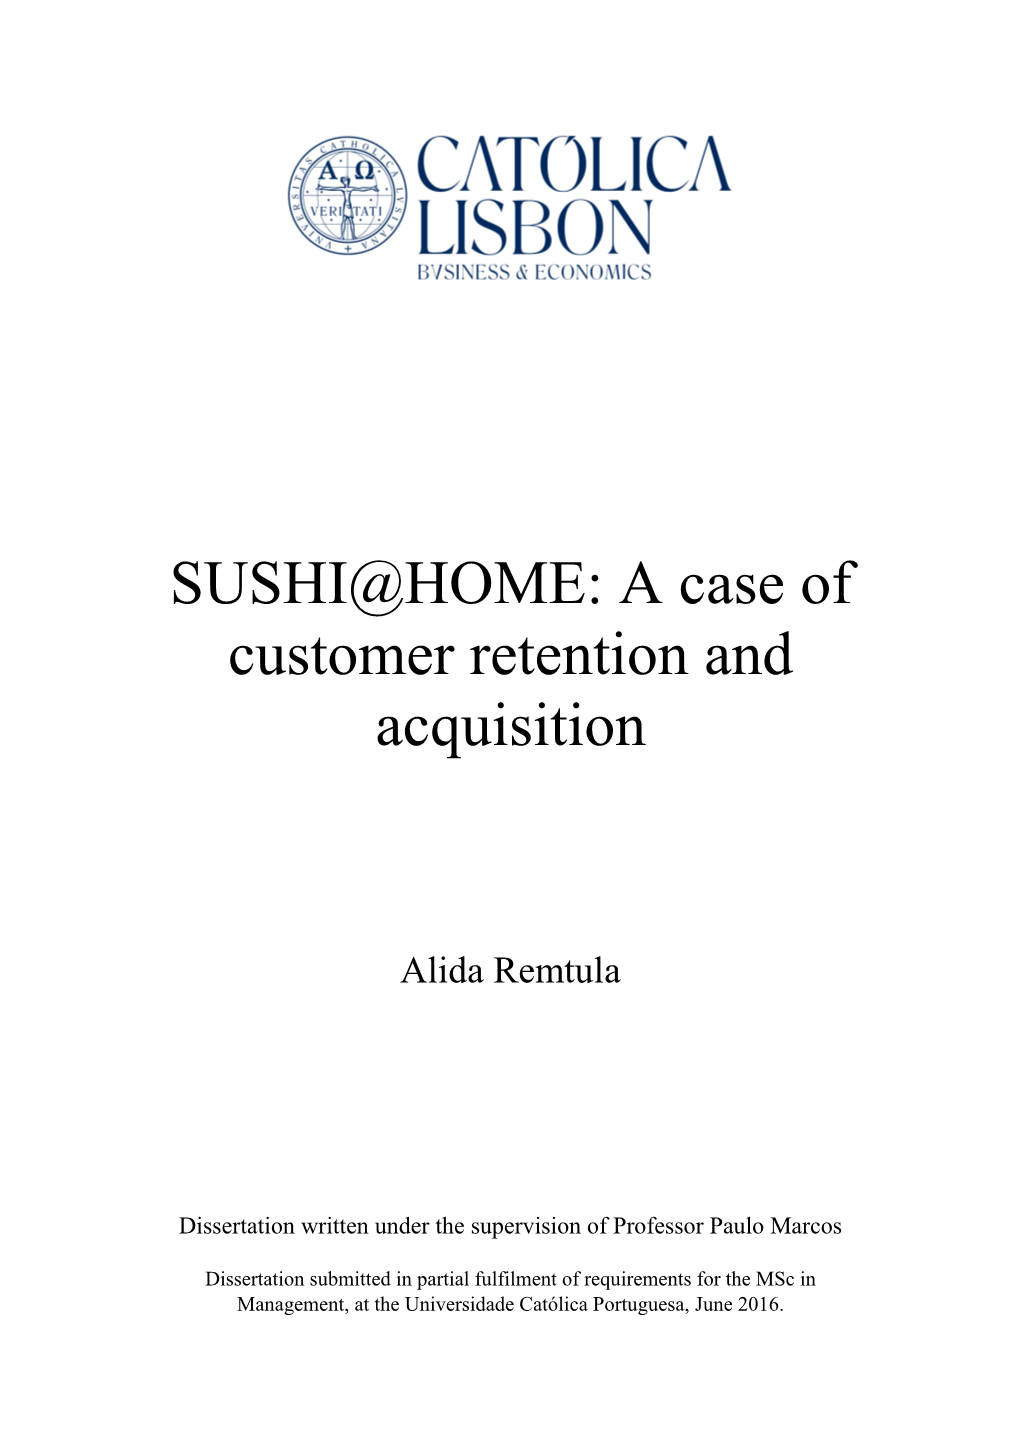 SUSHI@HOME: a Case of Customer Retention and Acquisition